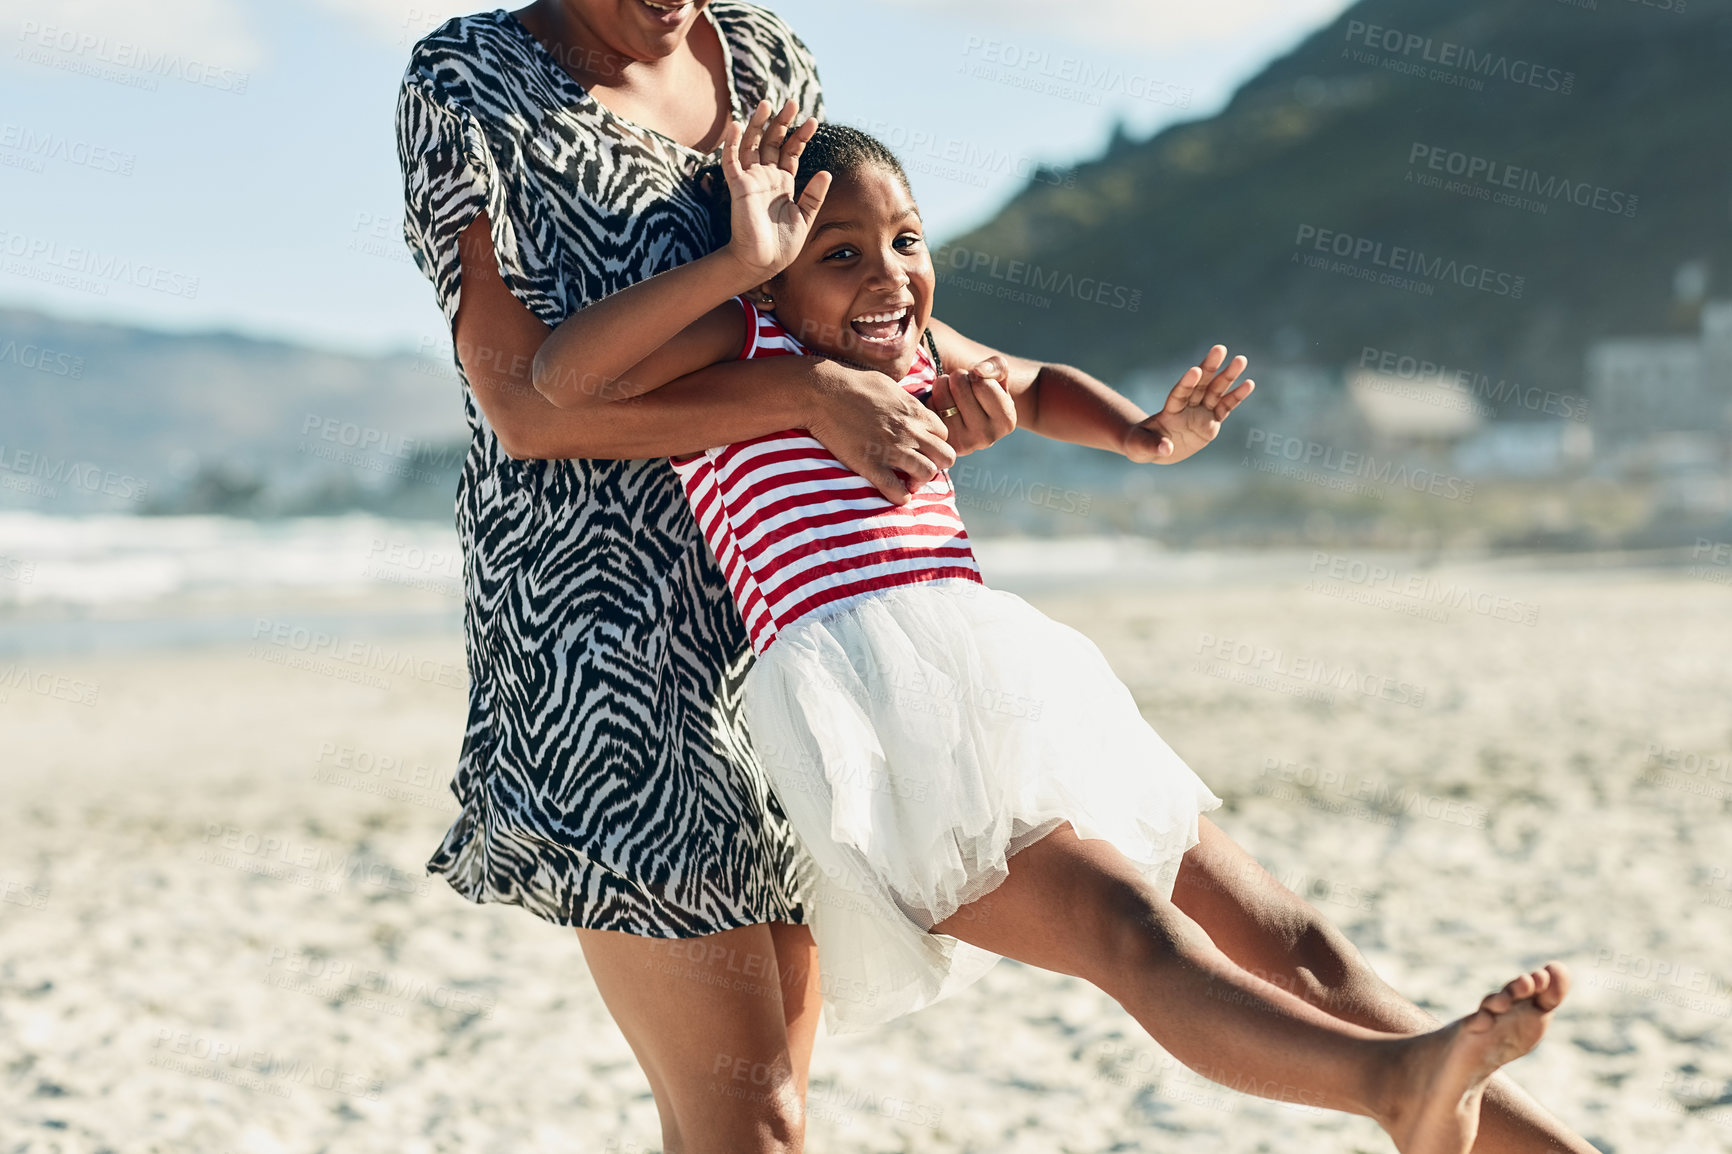 Buy stock photo Shot of a mother and her little daughter enjoying some quality time together at the beach